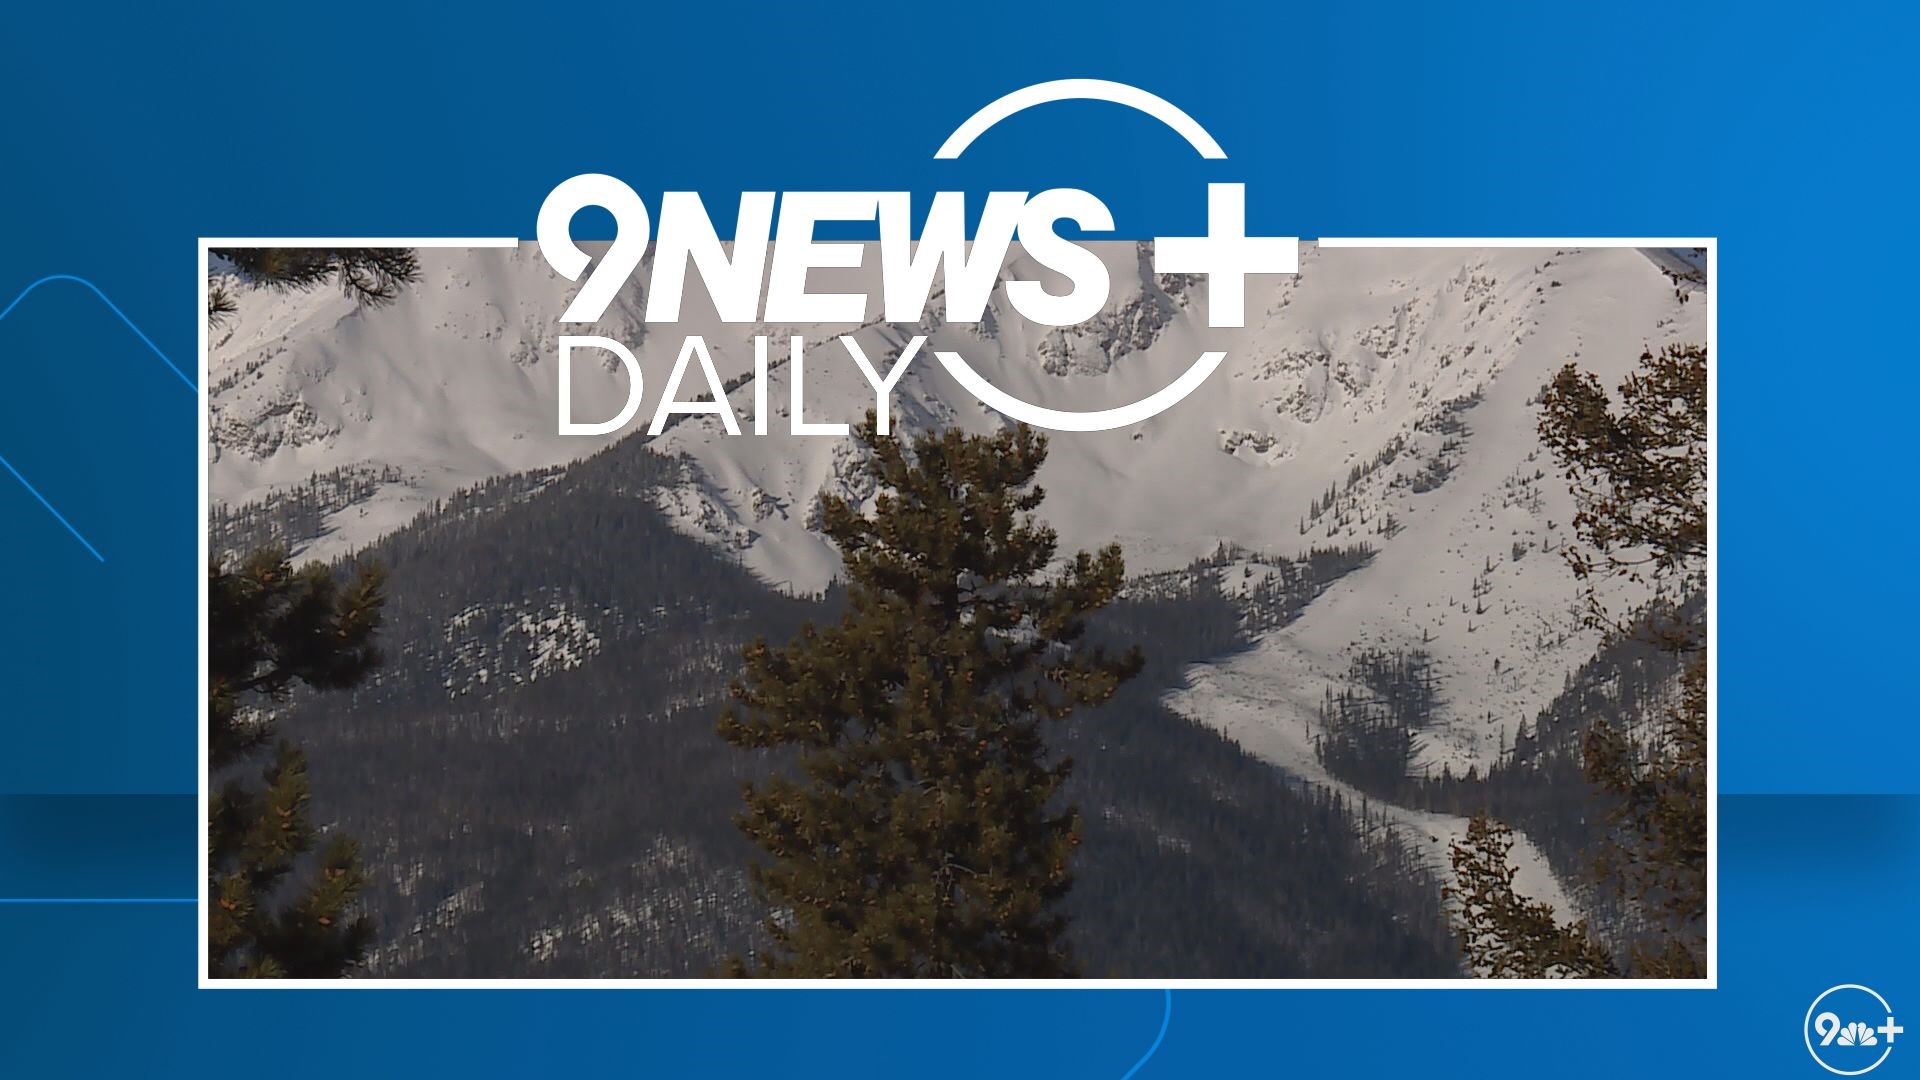 9NEWS meteorologists give their predictions for how much snow Denver and Colorado might see this winter.